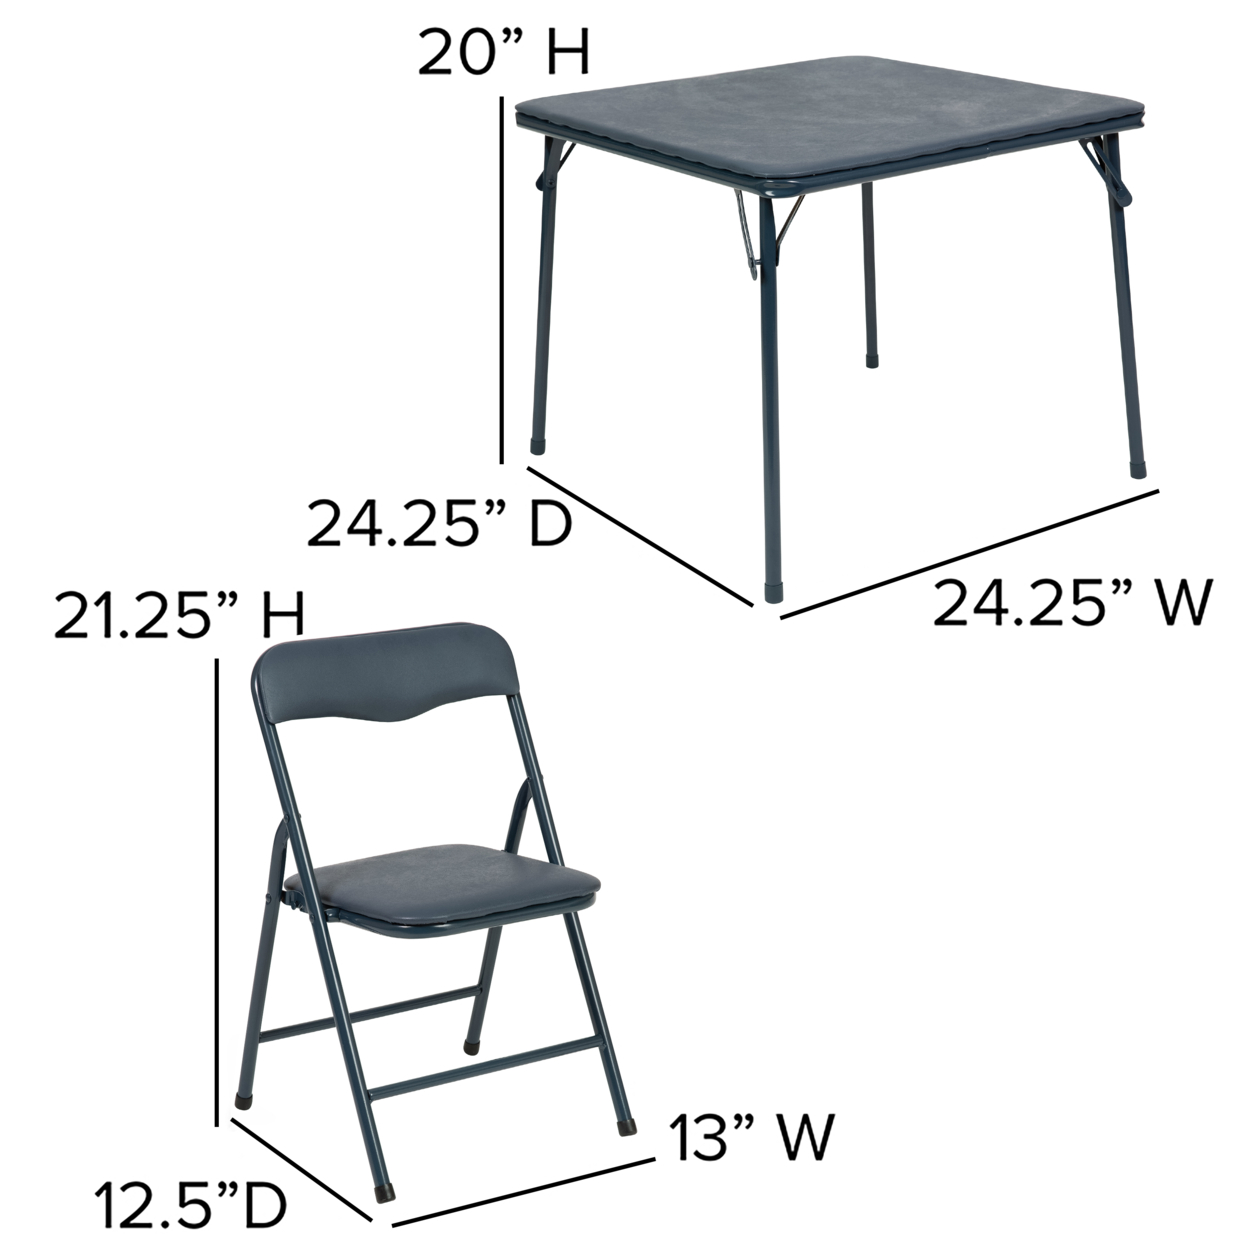 Kids Navy 5 Piece Folding Table And Chair Set